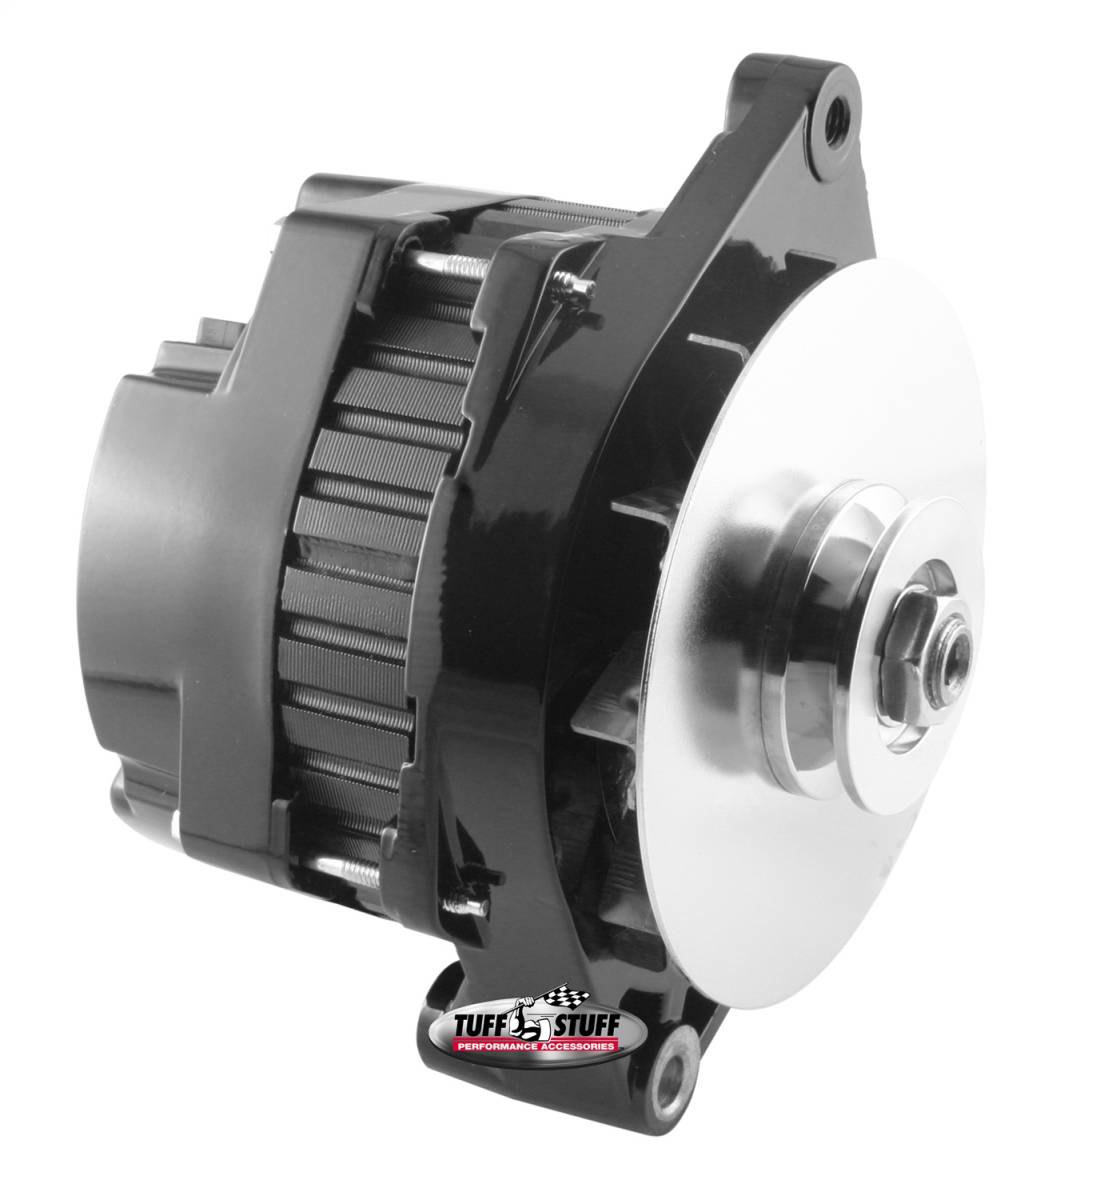 Tuff Stuff Performance - Alternator 250 High AMP Incl. Pigtail/OEM Wiring V Groove Pulley Black 7290NF